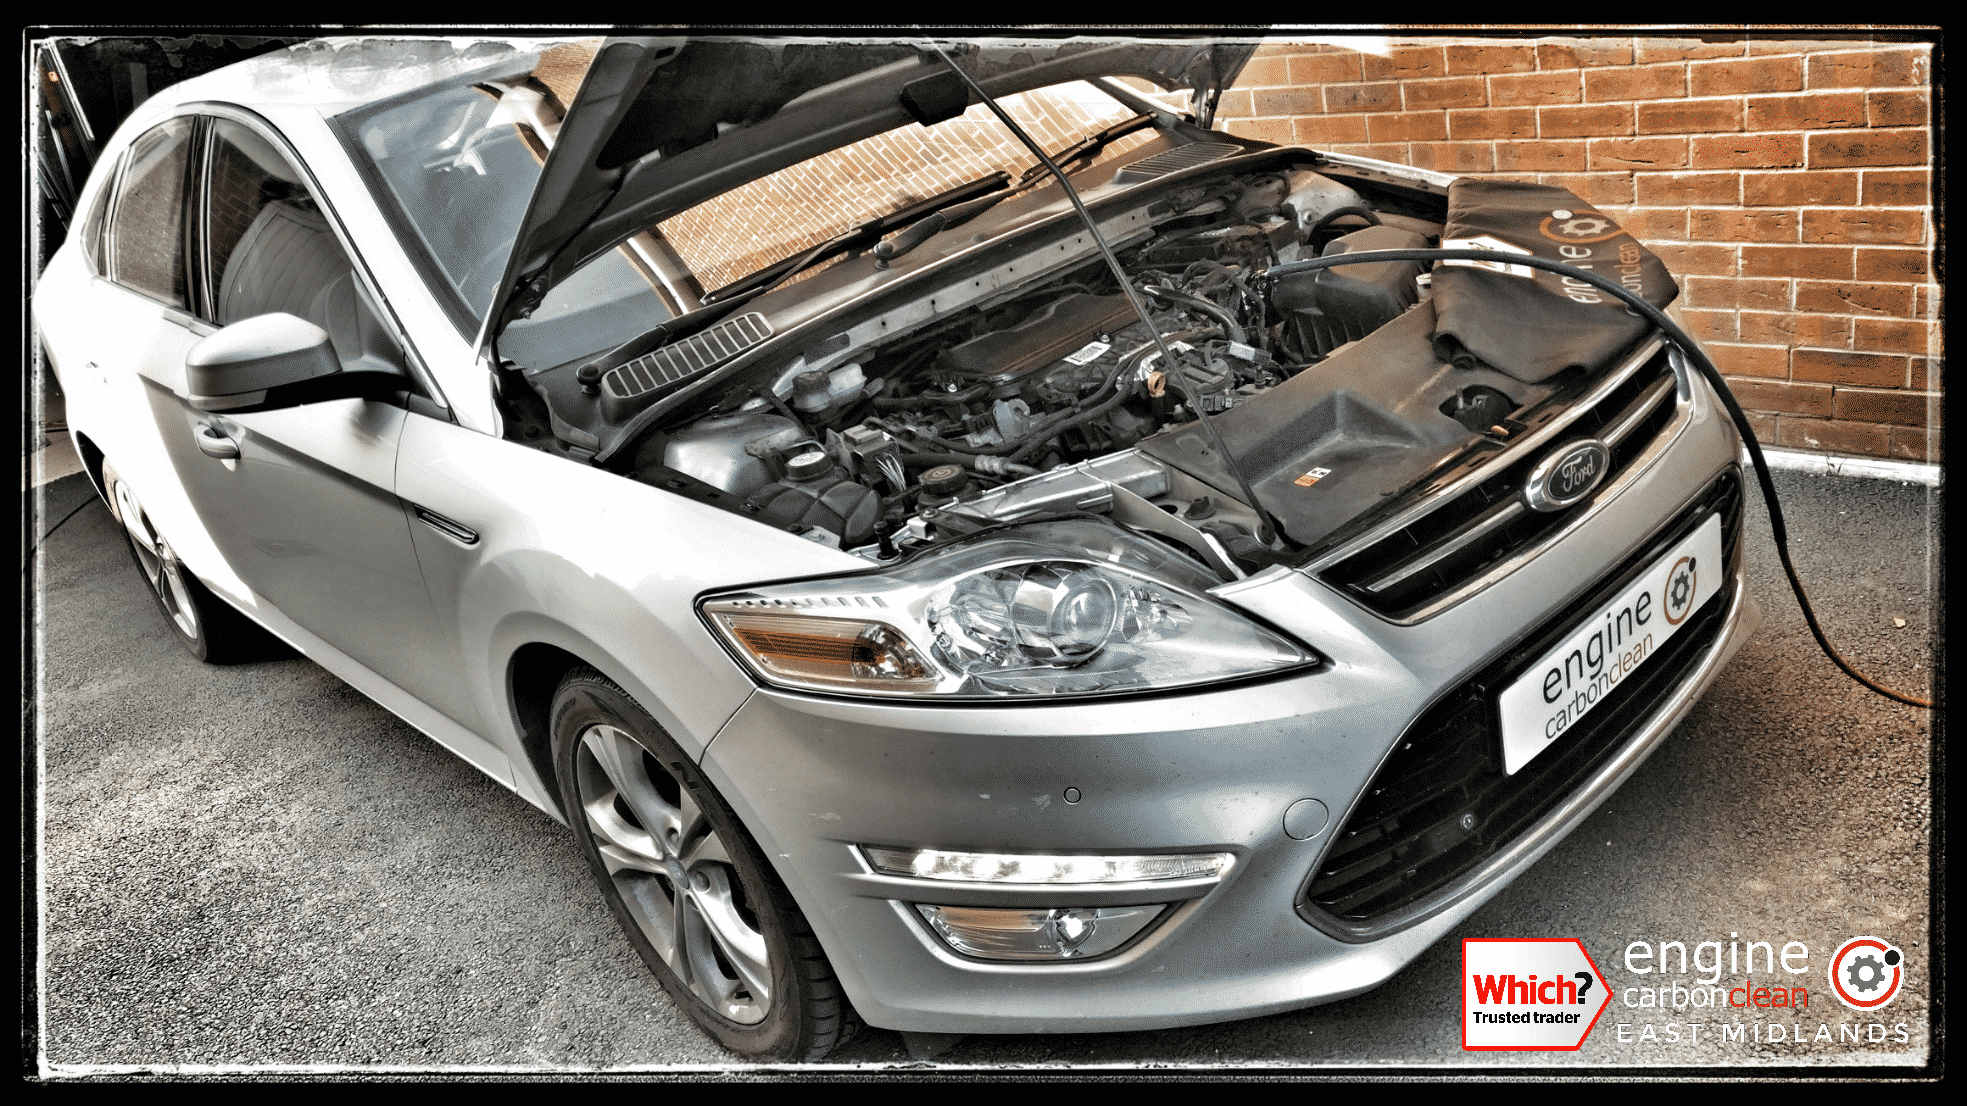 Engine Carbon Clean on a Ford Mondeo 2.0 TDCi (2010 - 172,175 miles)